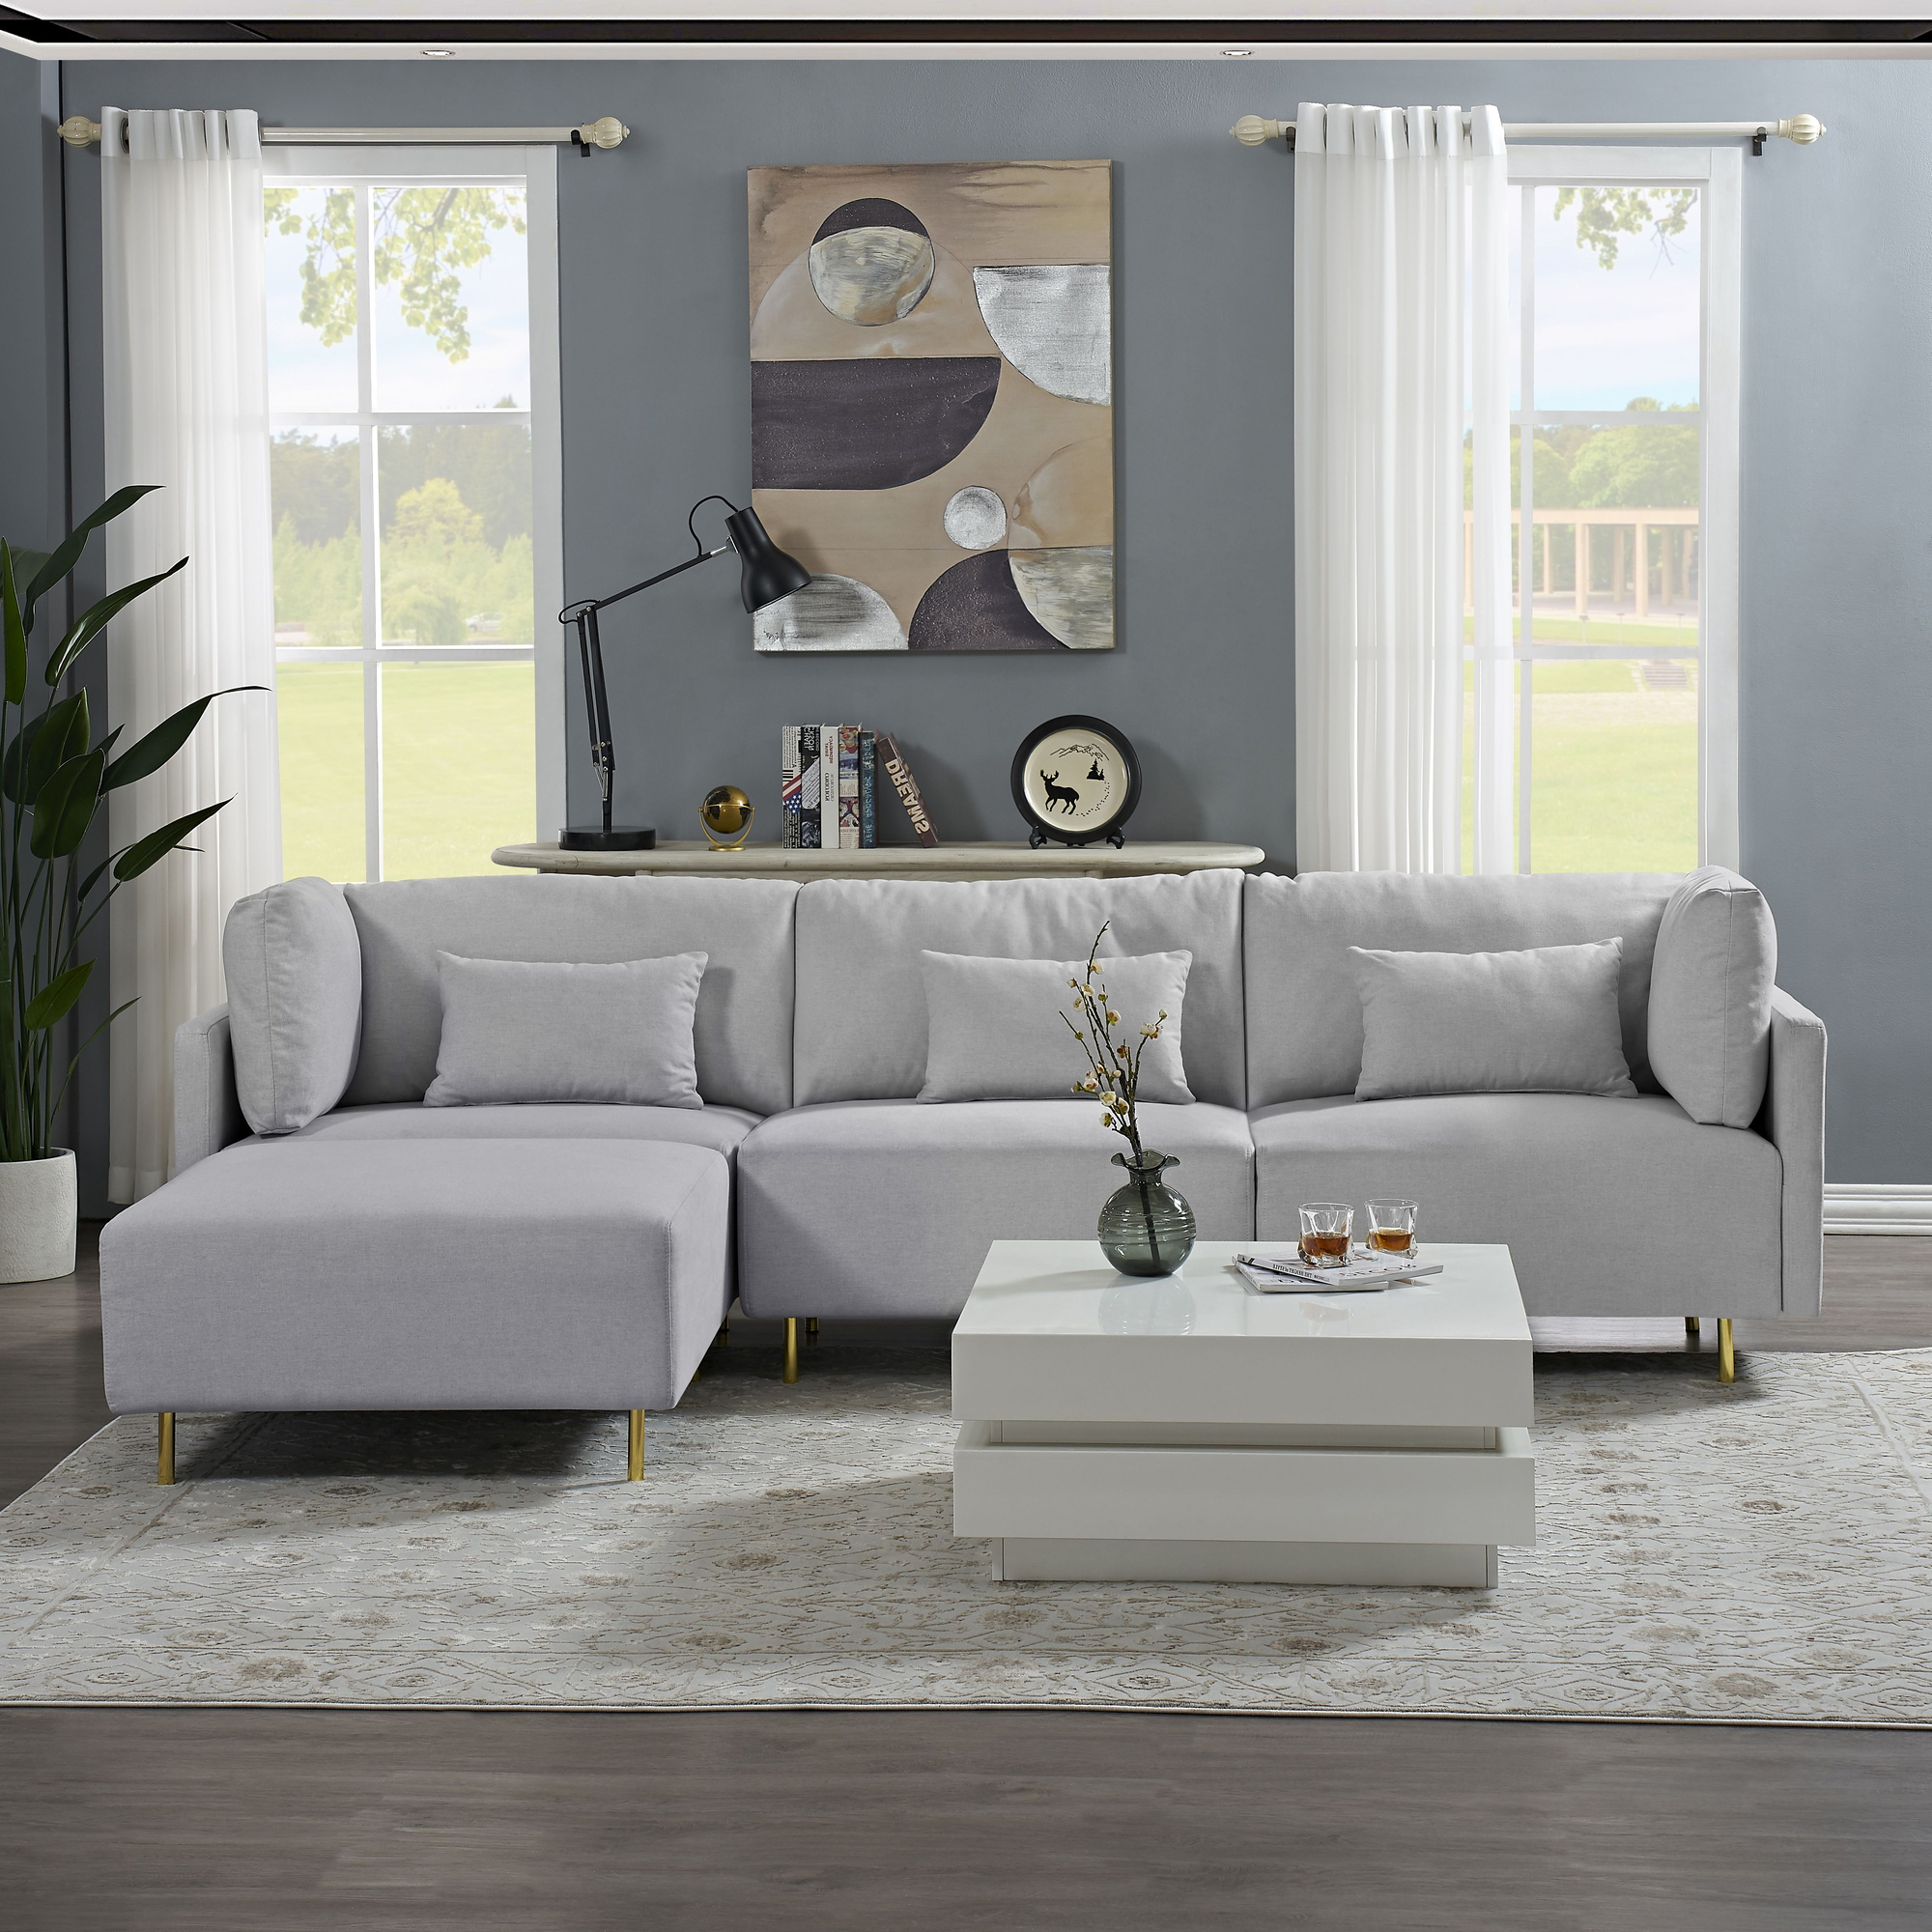 Modern Luxury Sectional Sofa Couch Quality Upholstery L Shape Sofa Golden Metal Leg with Convertible Ottoman Chaise Grey-CASAINC